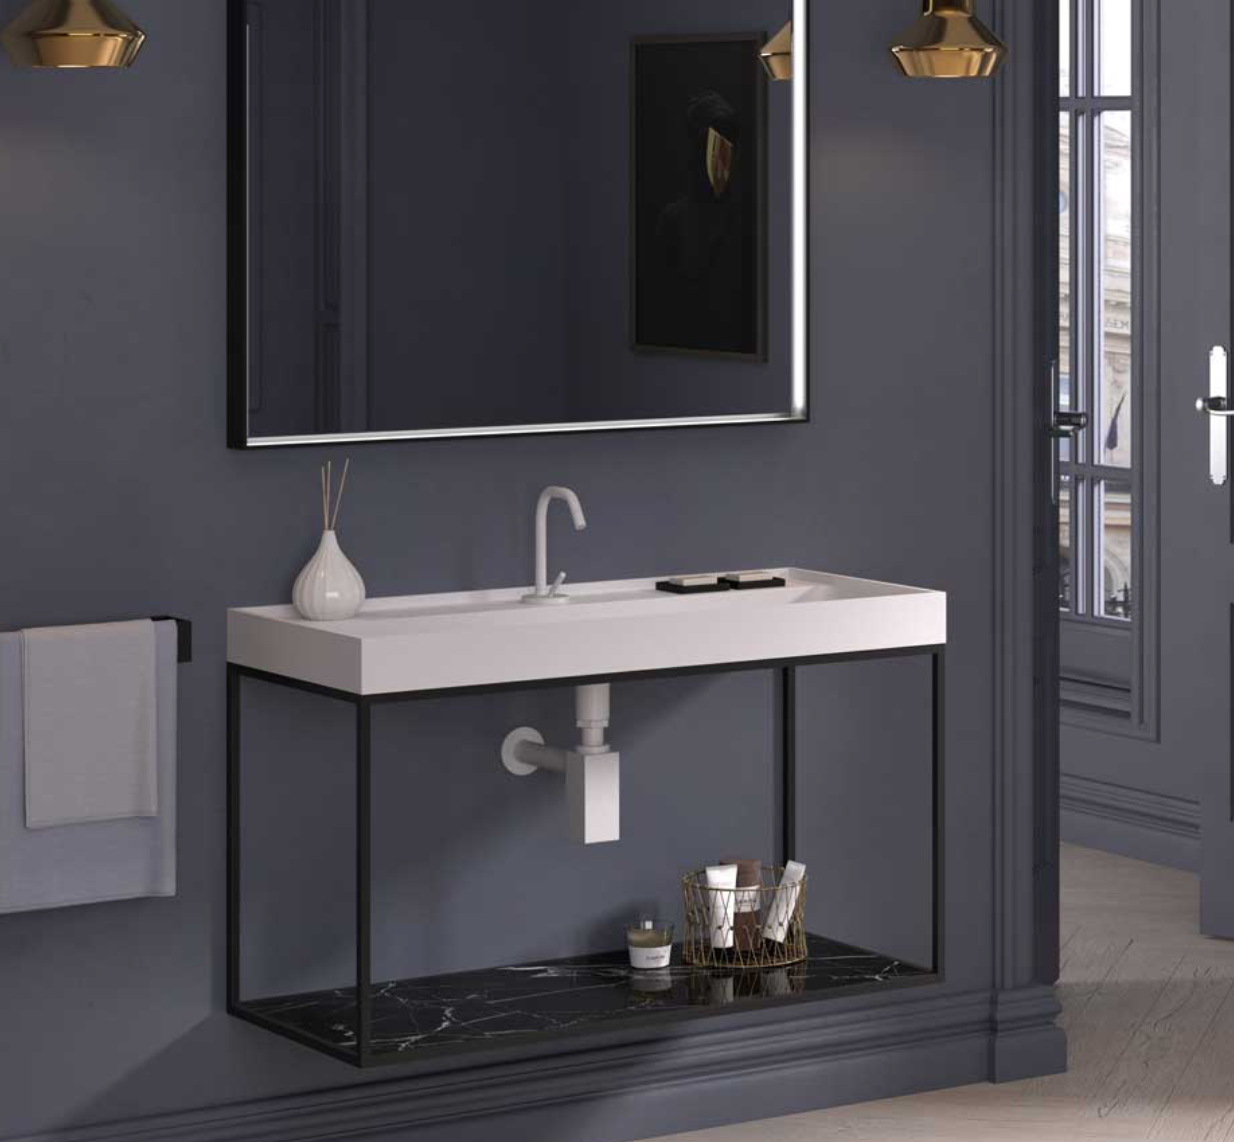 Stoneacril® Tribeca skirted countertop with integrated Madero Atelier washbasin for Tribeca furniture